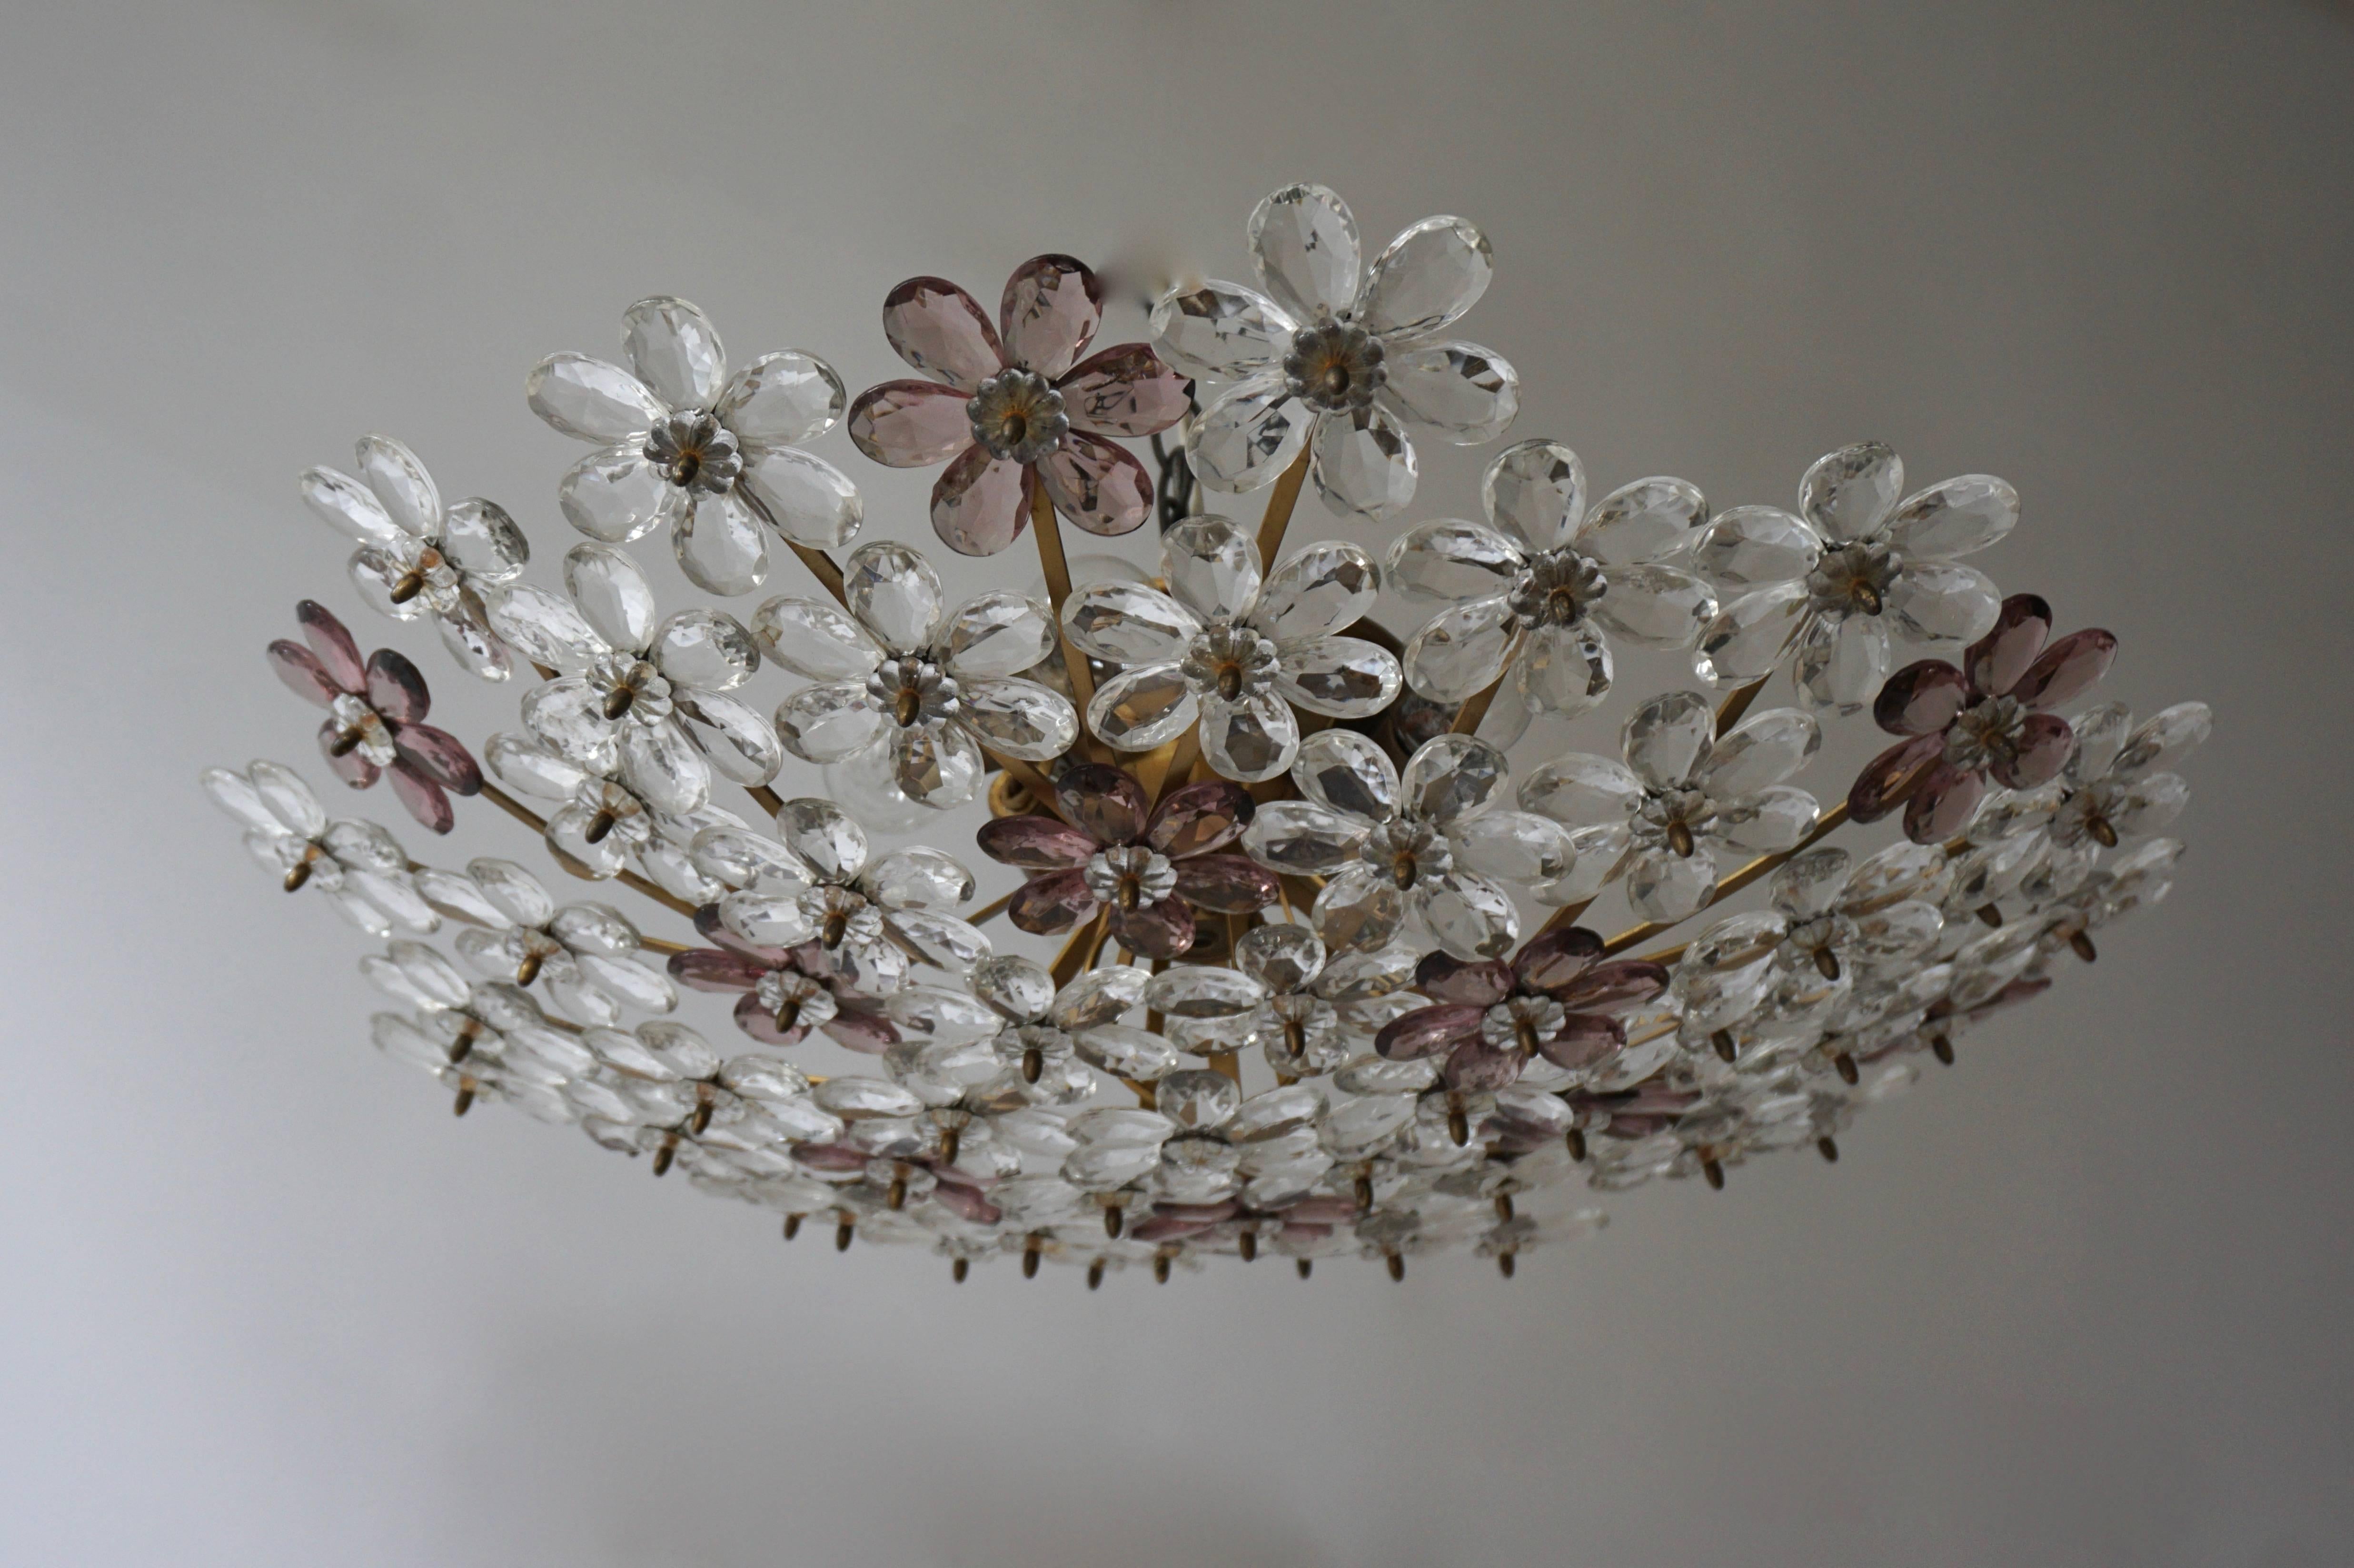 One of two Italian glass and brass flush mounts or wall lights with 60 glass flowers.
Measures: Diameter: 65 cm. 
Height:18 cm.
The light requires five single E14 screw fit lightbulbs (60Watt max.) LED compatible.